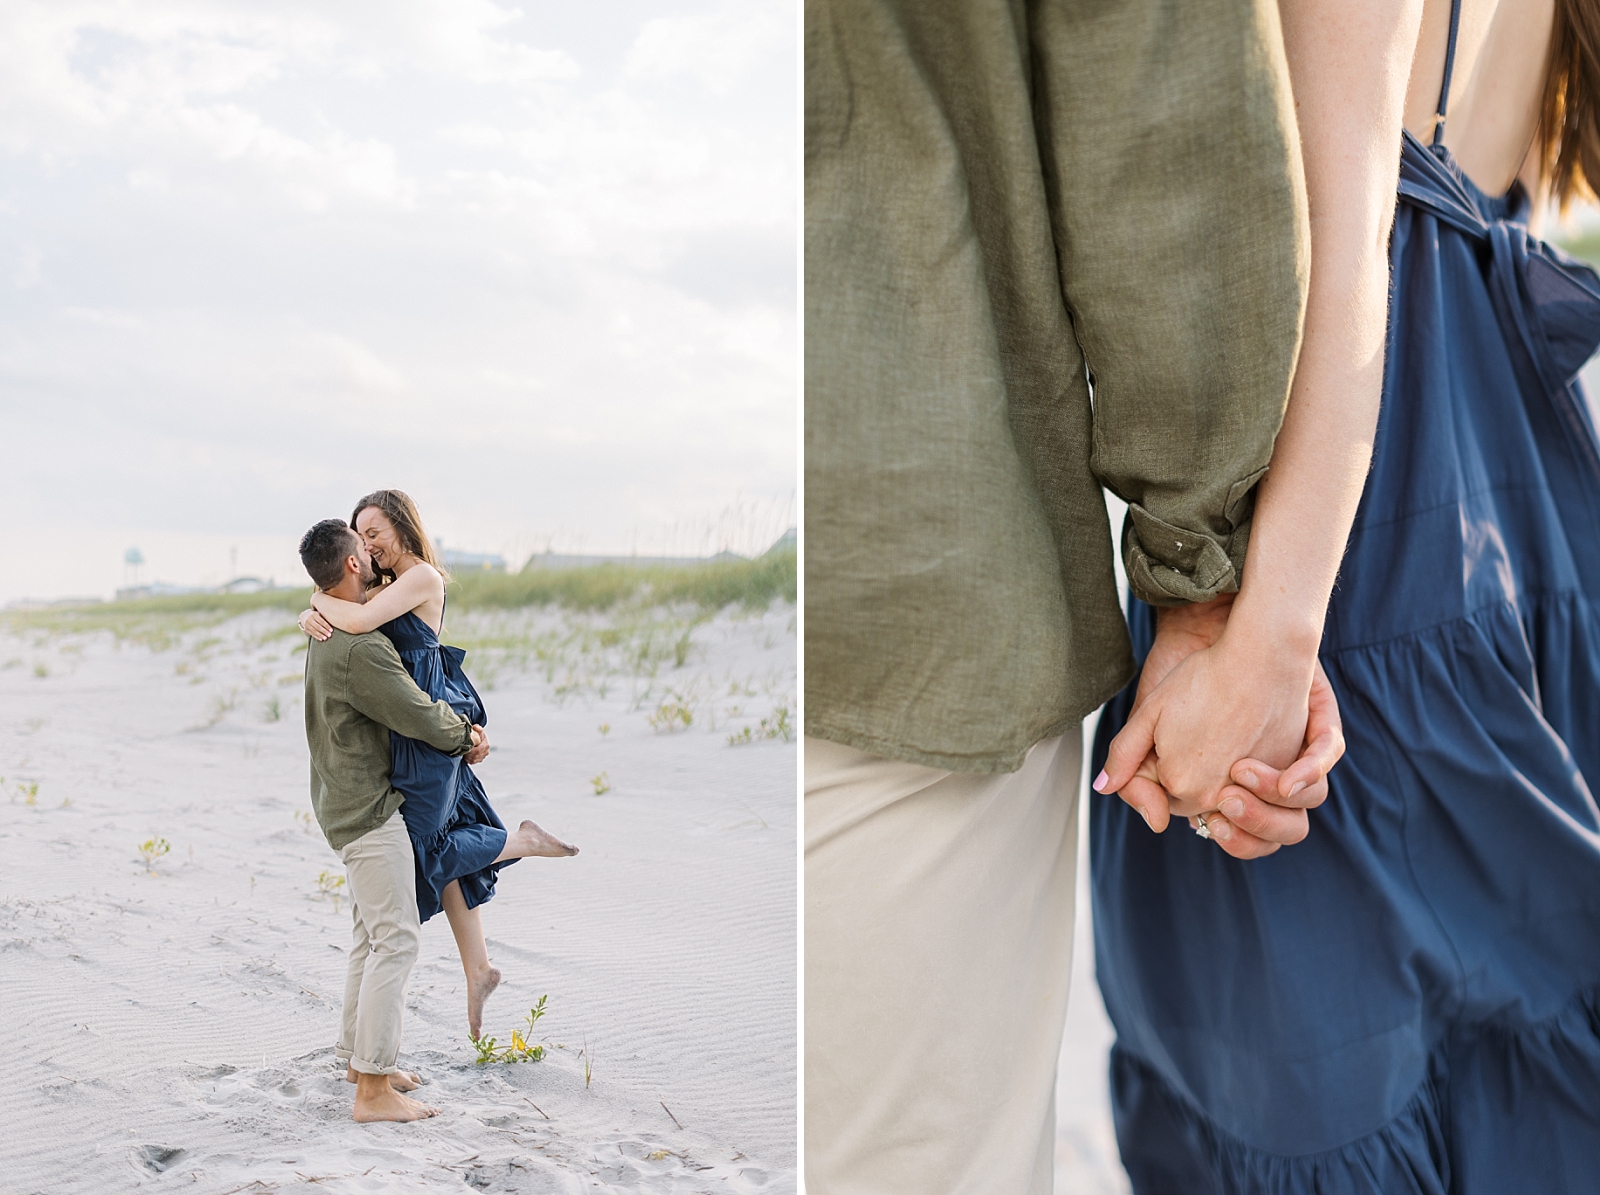 Romantic summer engagement photos with blue and green colors on the beach | Raleigh North Carolina Wedding Photographer